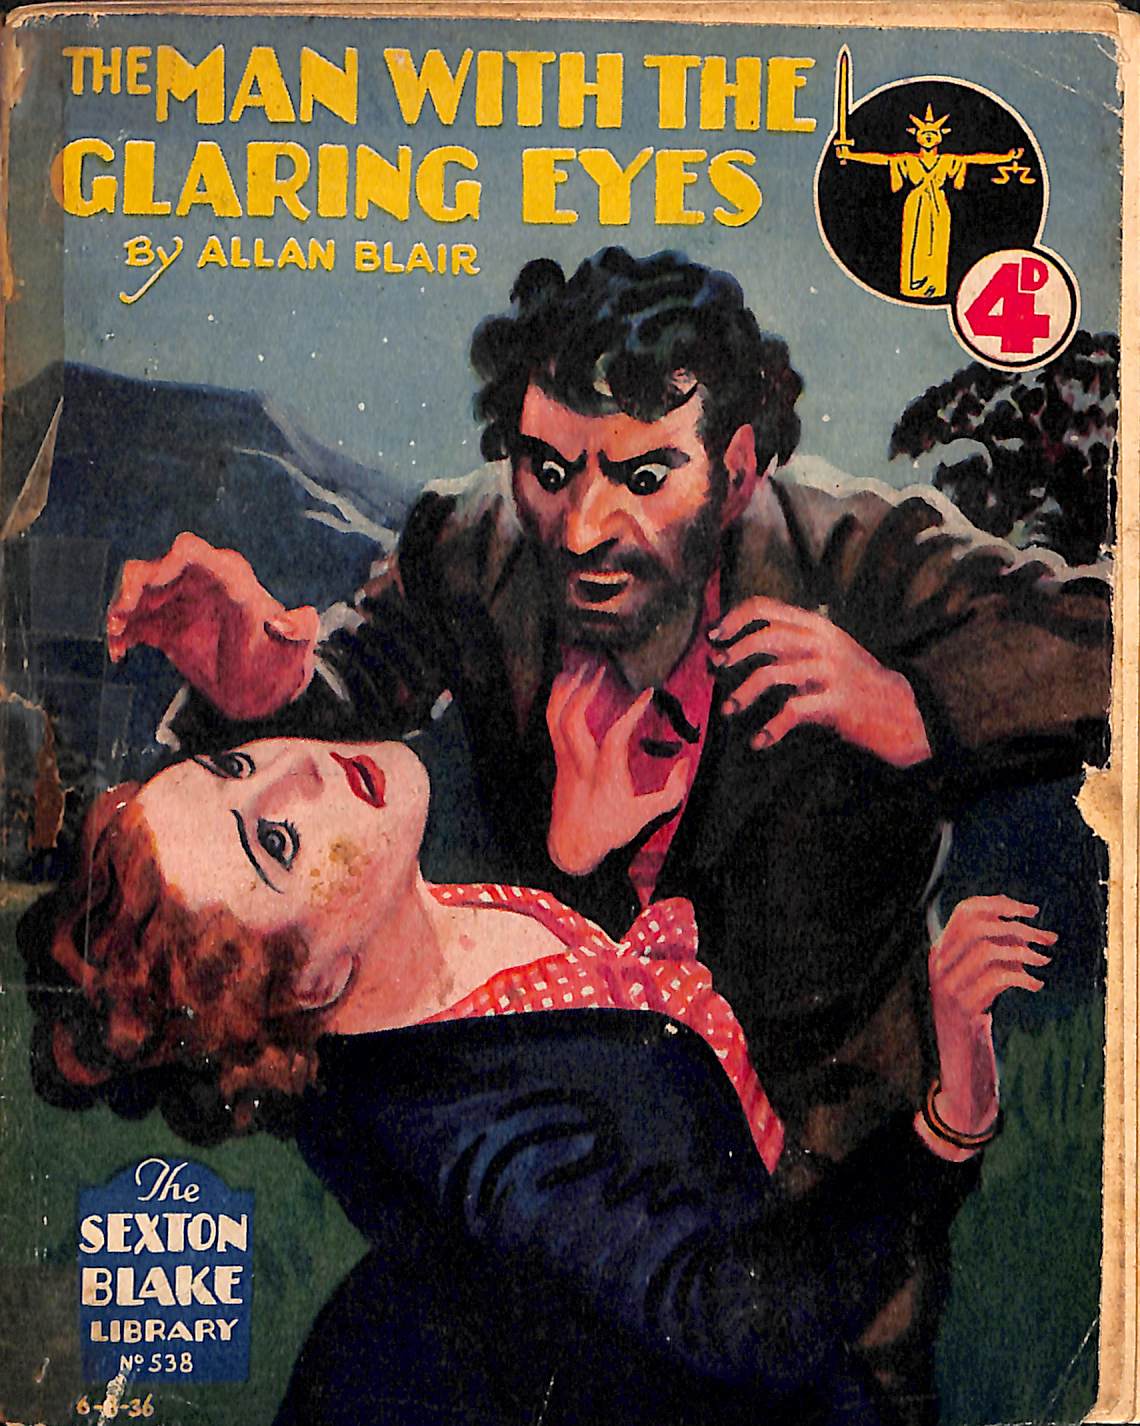 Comic Book Cover For Sexton Blake Library S2 538 - The Man With the Glaring Eyes